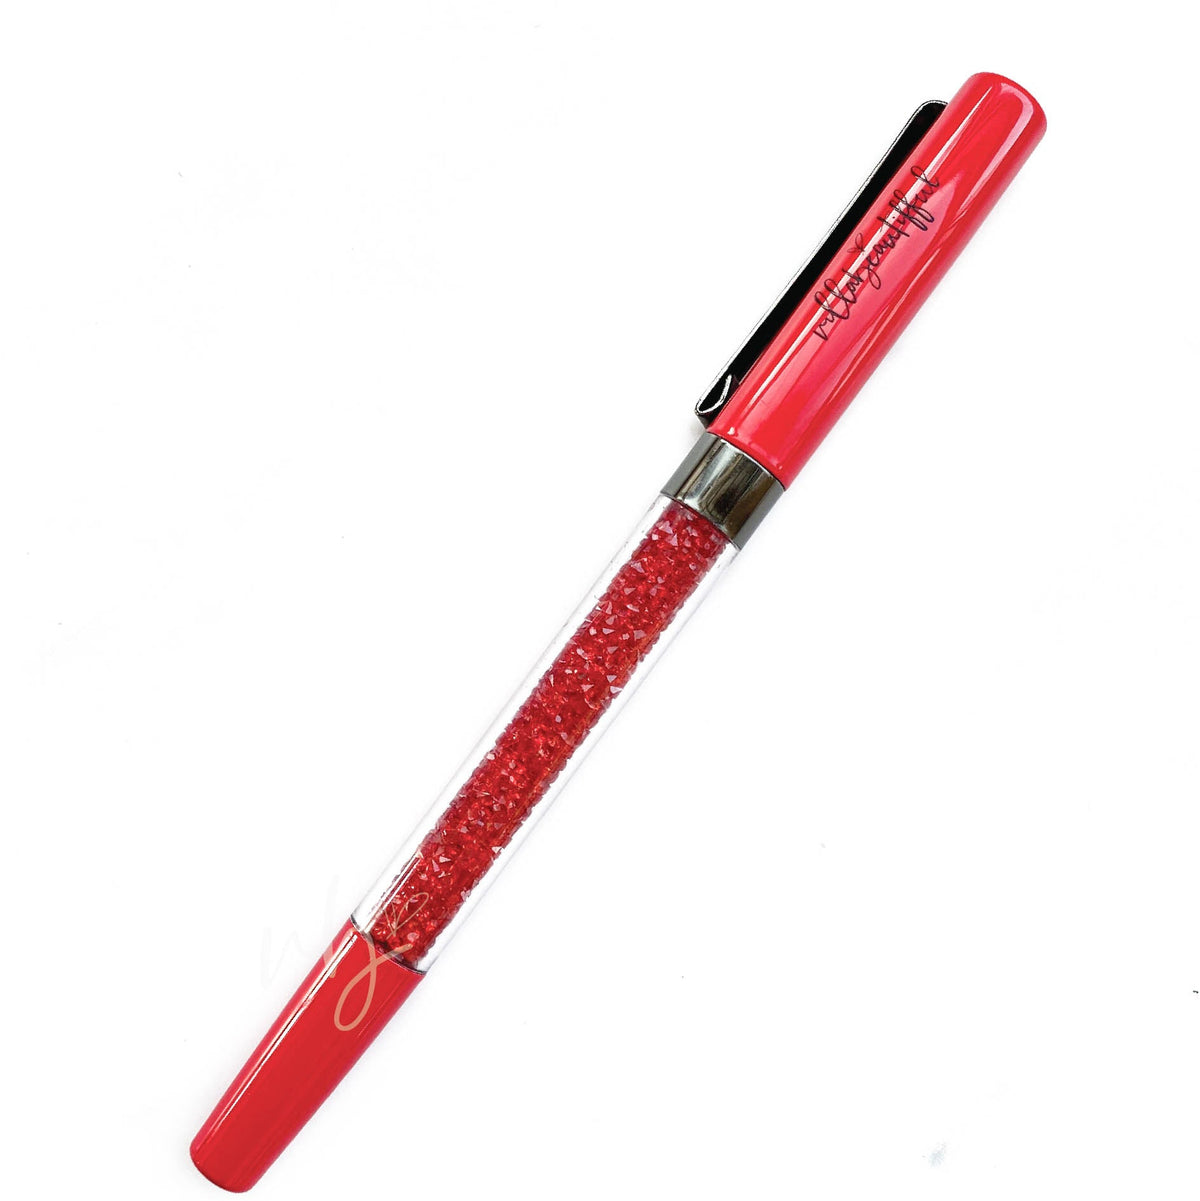 Red Hot Imperfect Crystal VBPen | limited pen